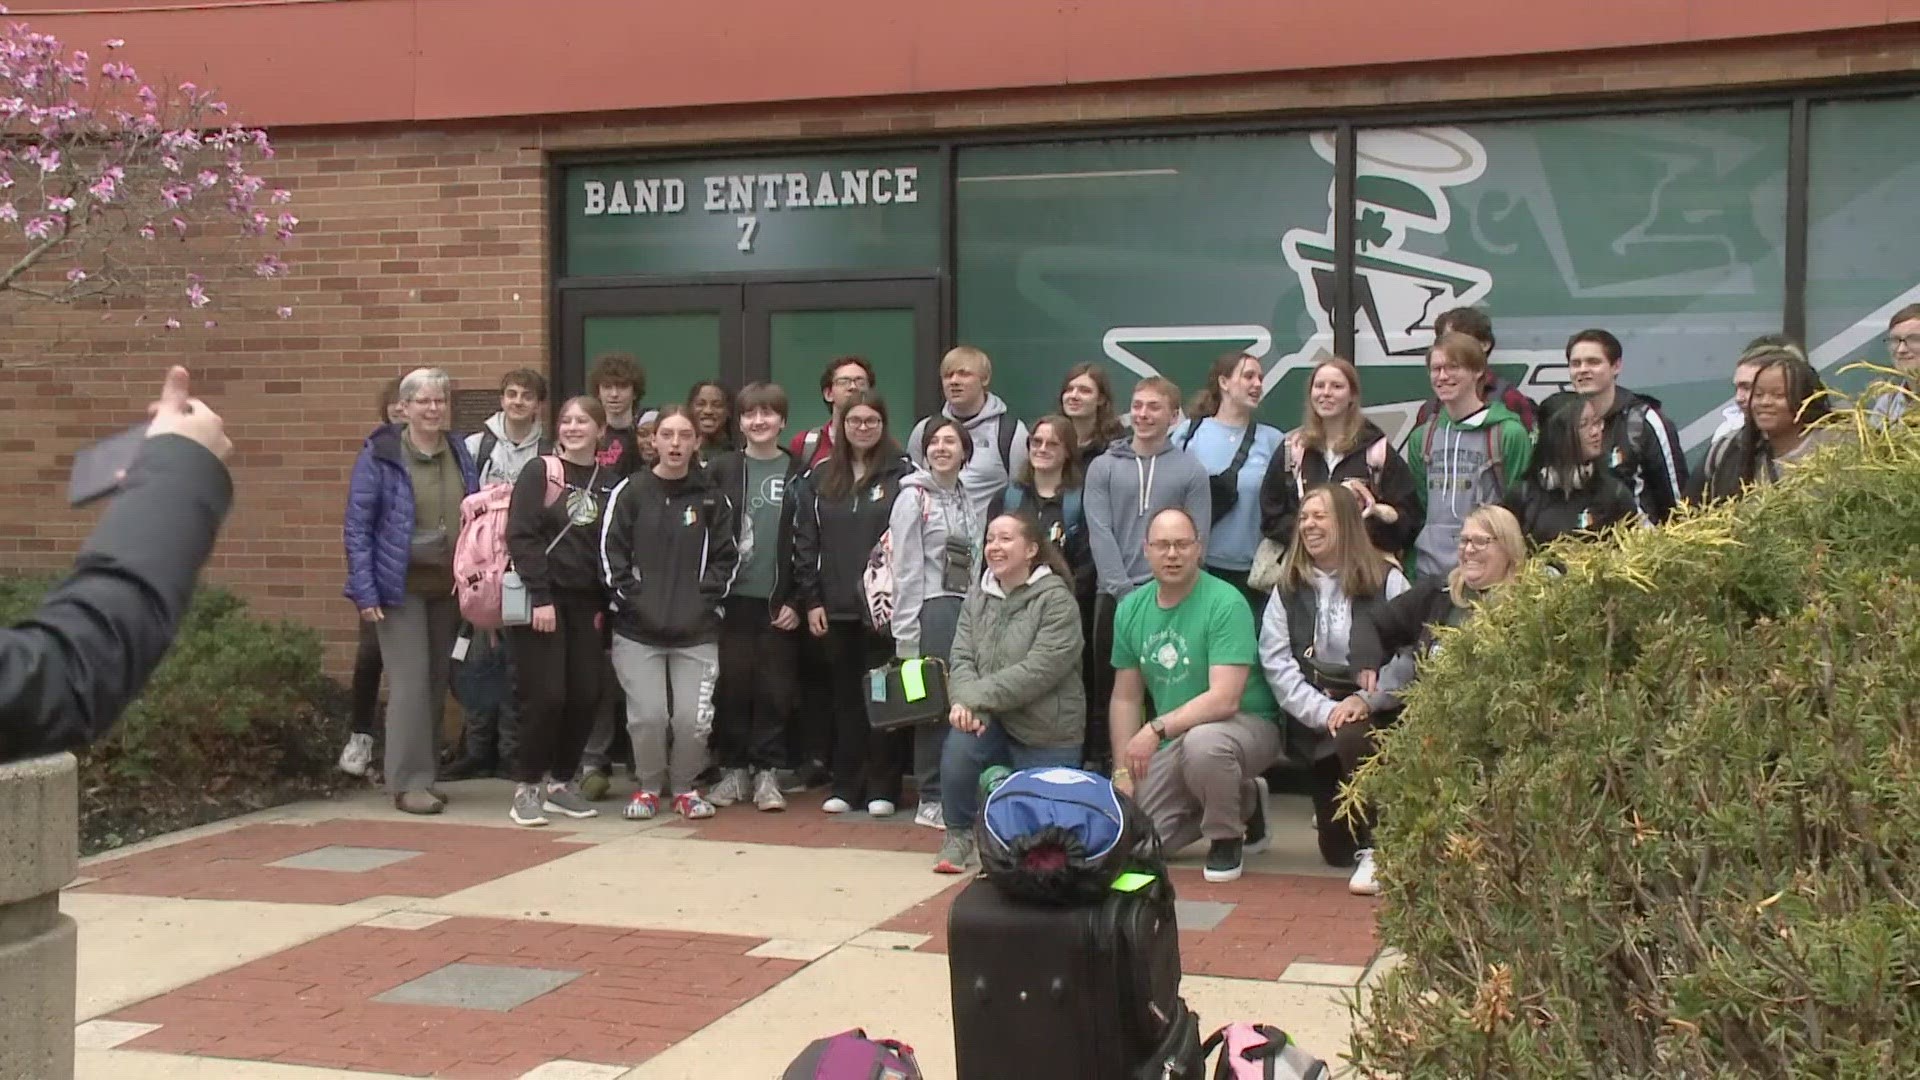 Students from St. Vincent-St. Mary High School are on their way to Ireland to march in the St. Patrick's Day Parade.